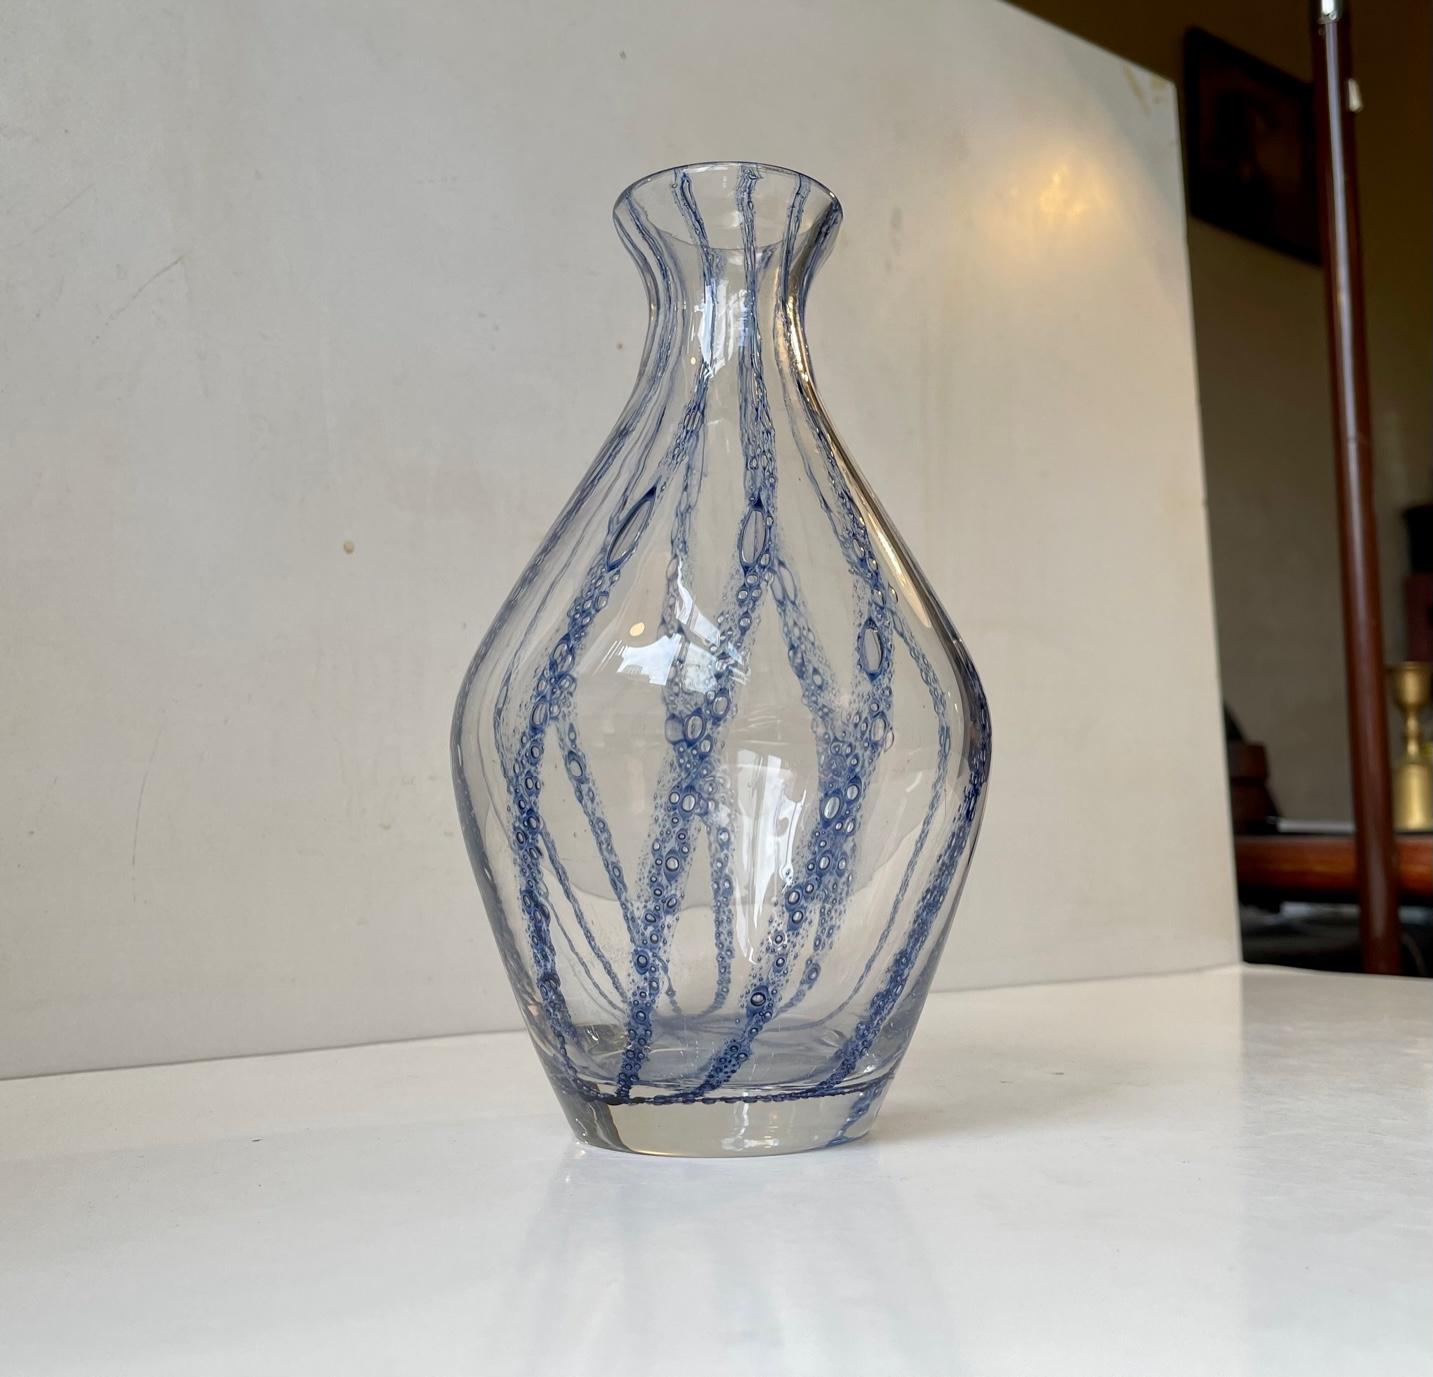 A 1930s Hand-blown clear glass vase with internal blue swirls. Made in Murano Italy during the 1930s or 40s. Distinct Art Deco styling. This designs is attributed to Ercole Barovier. This particular vase does not have any markings to the base.